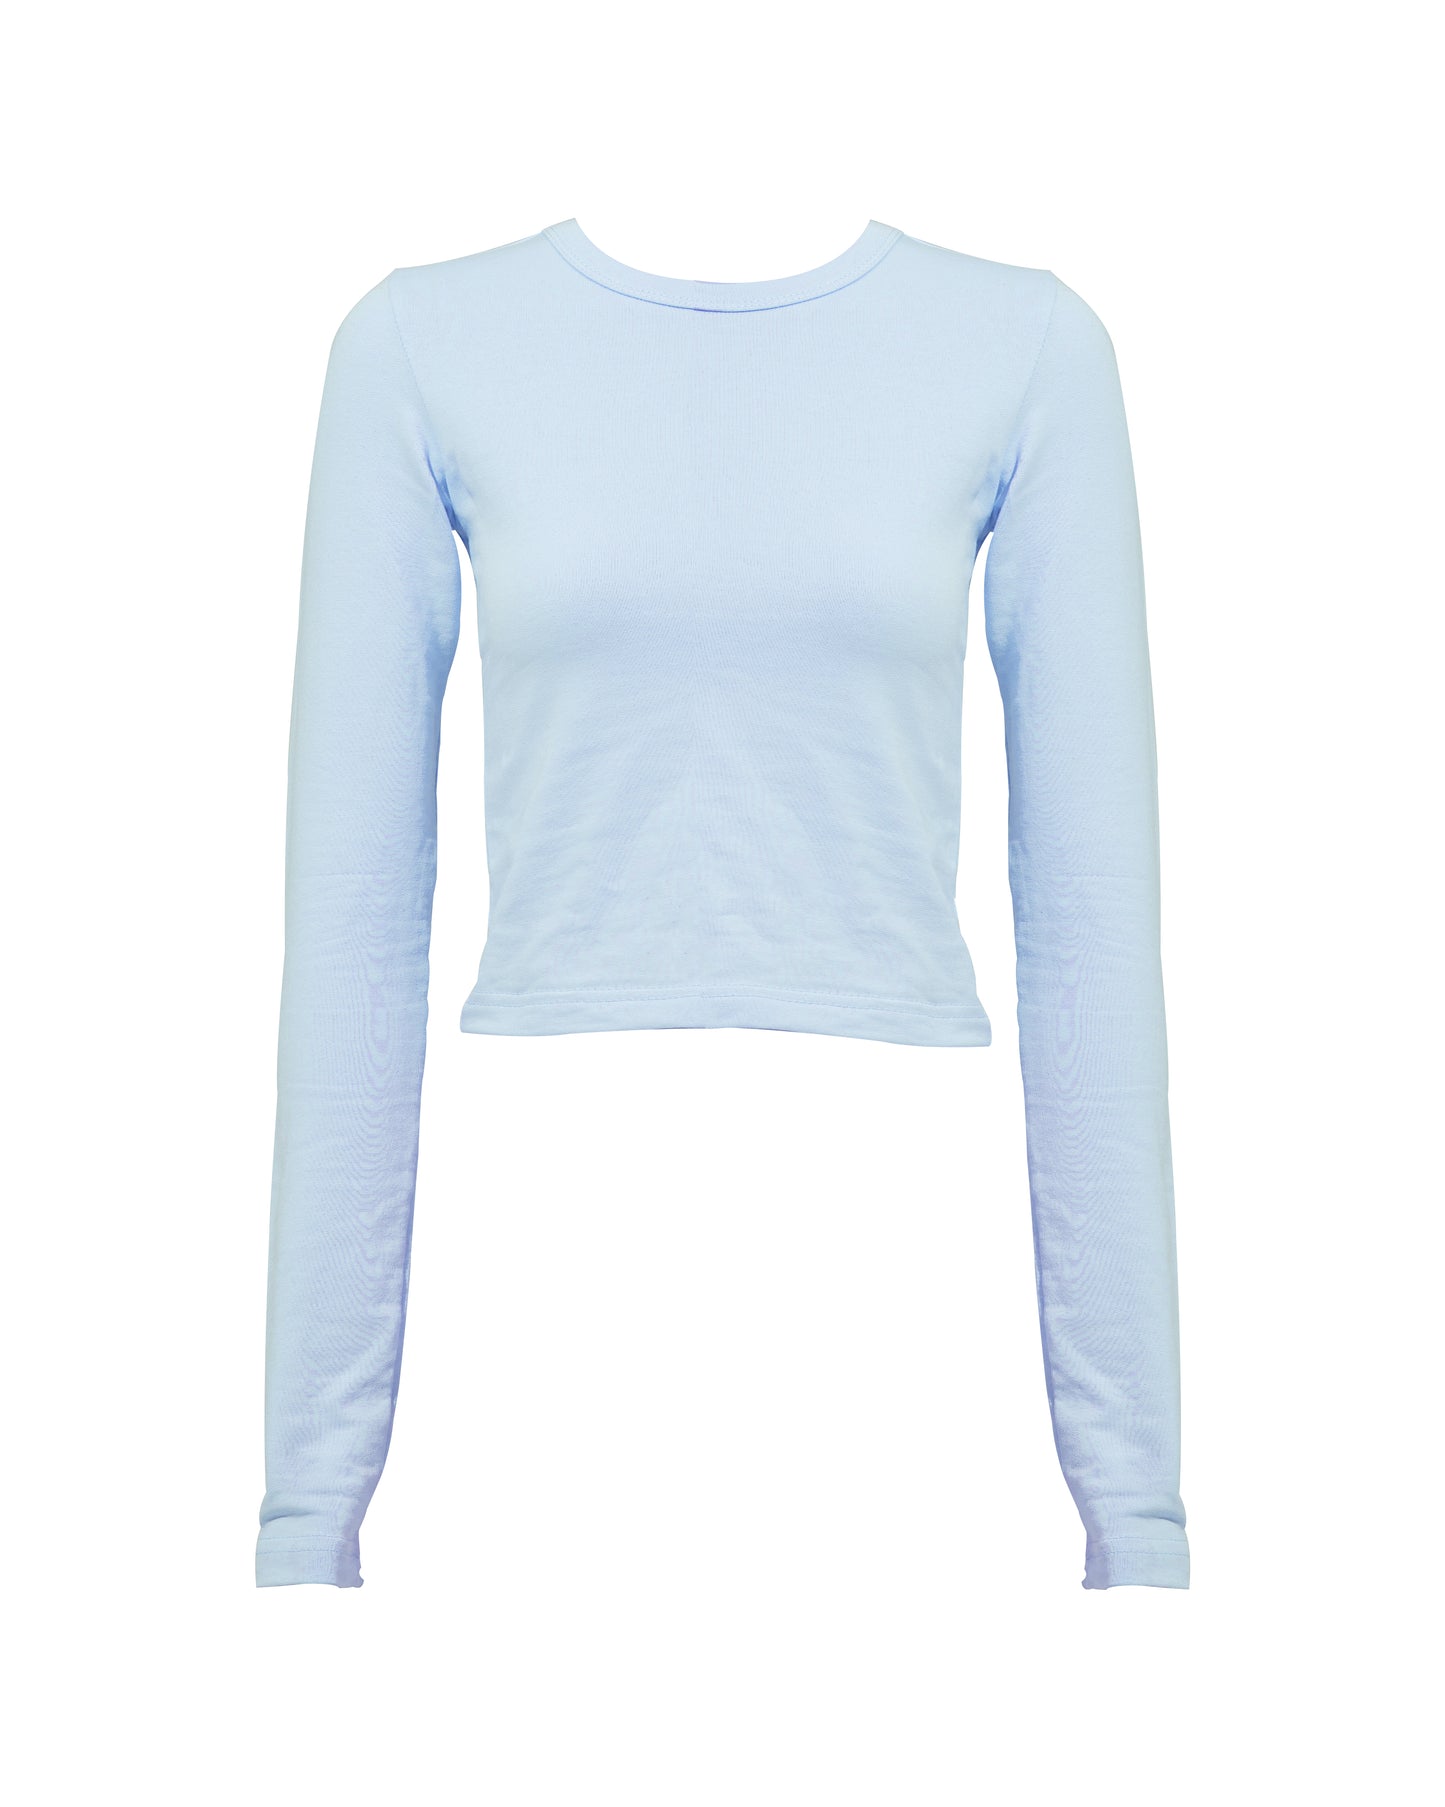 BABY BLUE COTTON - LONG SLEEVES TOP